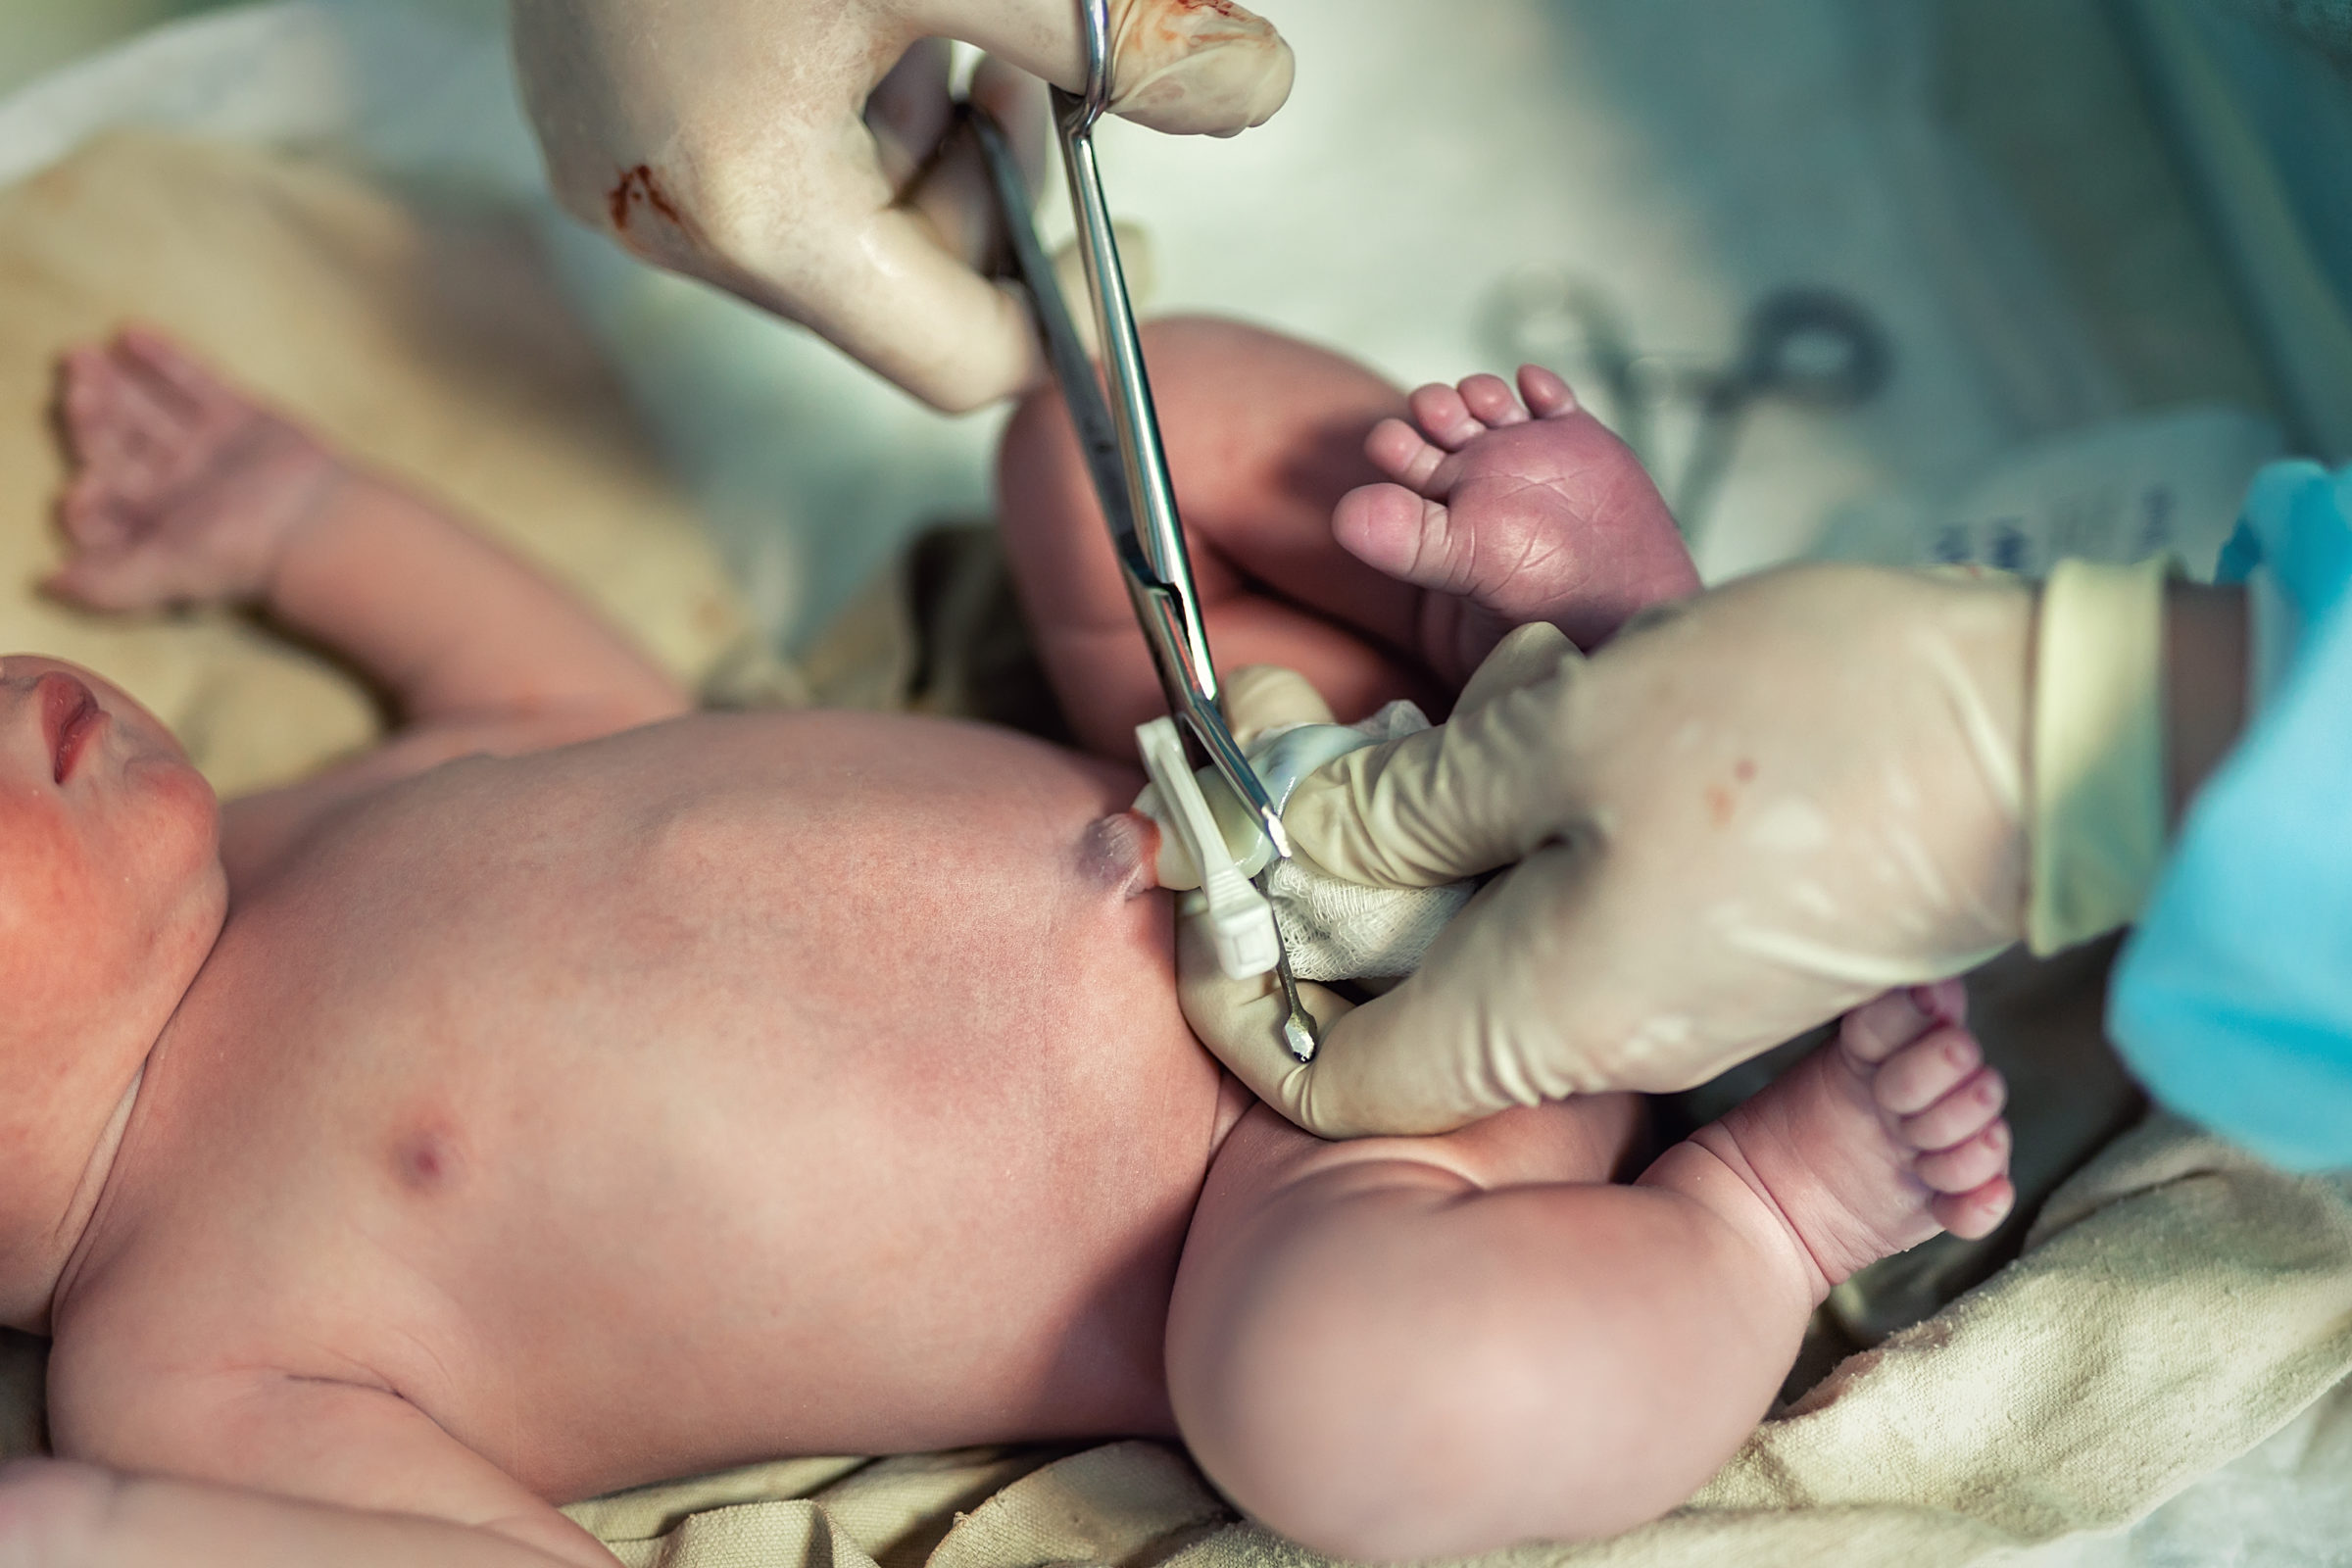 Close-up doctor obstetrician nurse cutting umbilical cord with medical scissors to newborn infant baby. Medical surgeon giving birth to child. New human life begin. delivery labor childbirth hospital